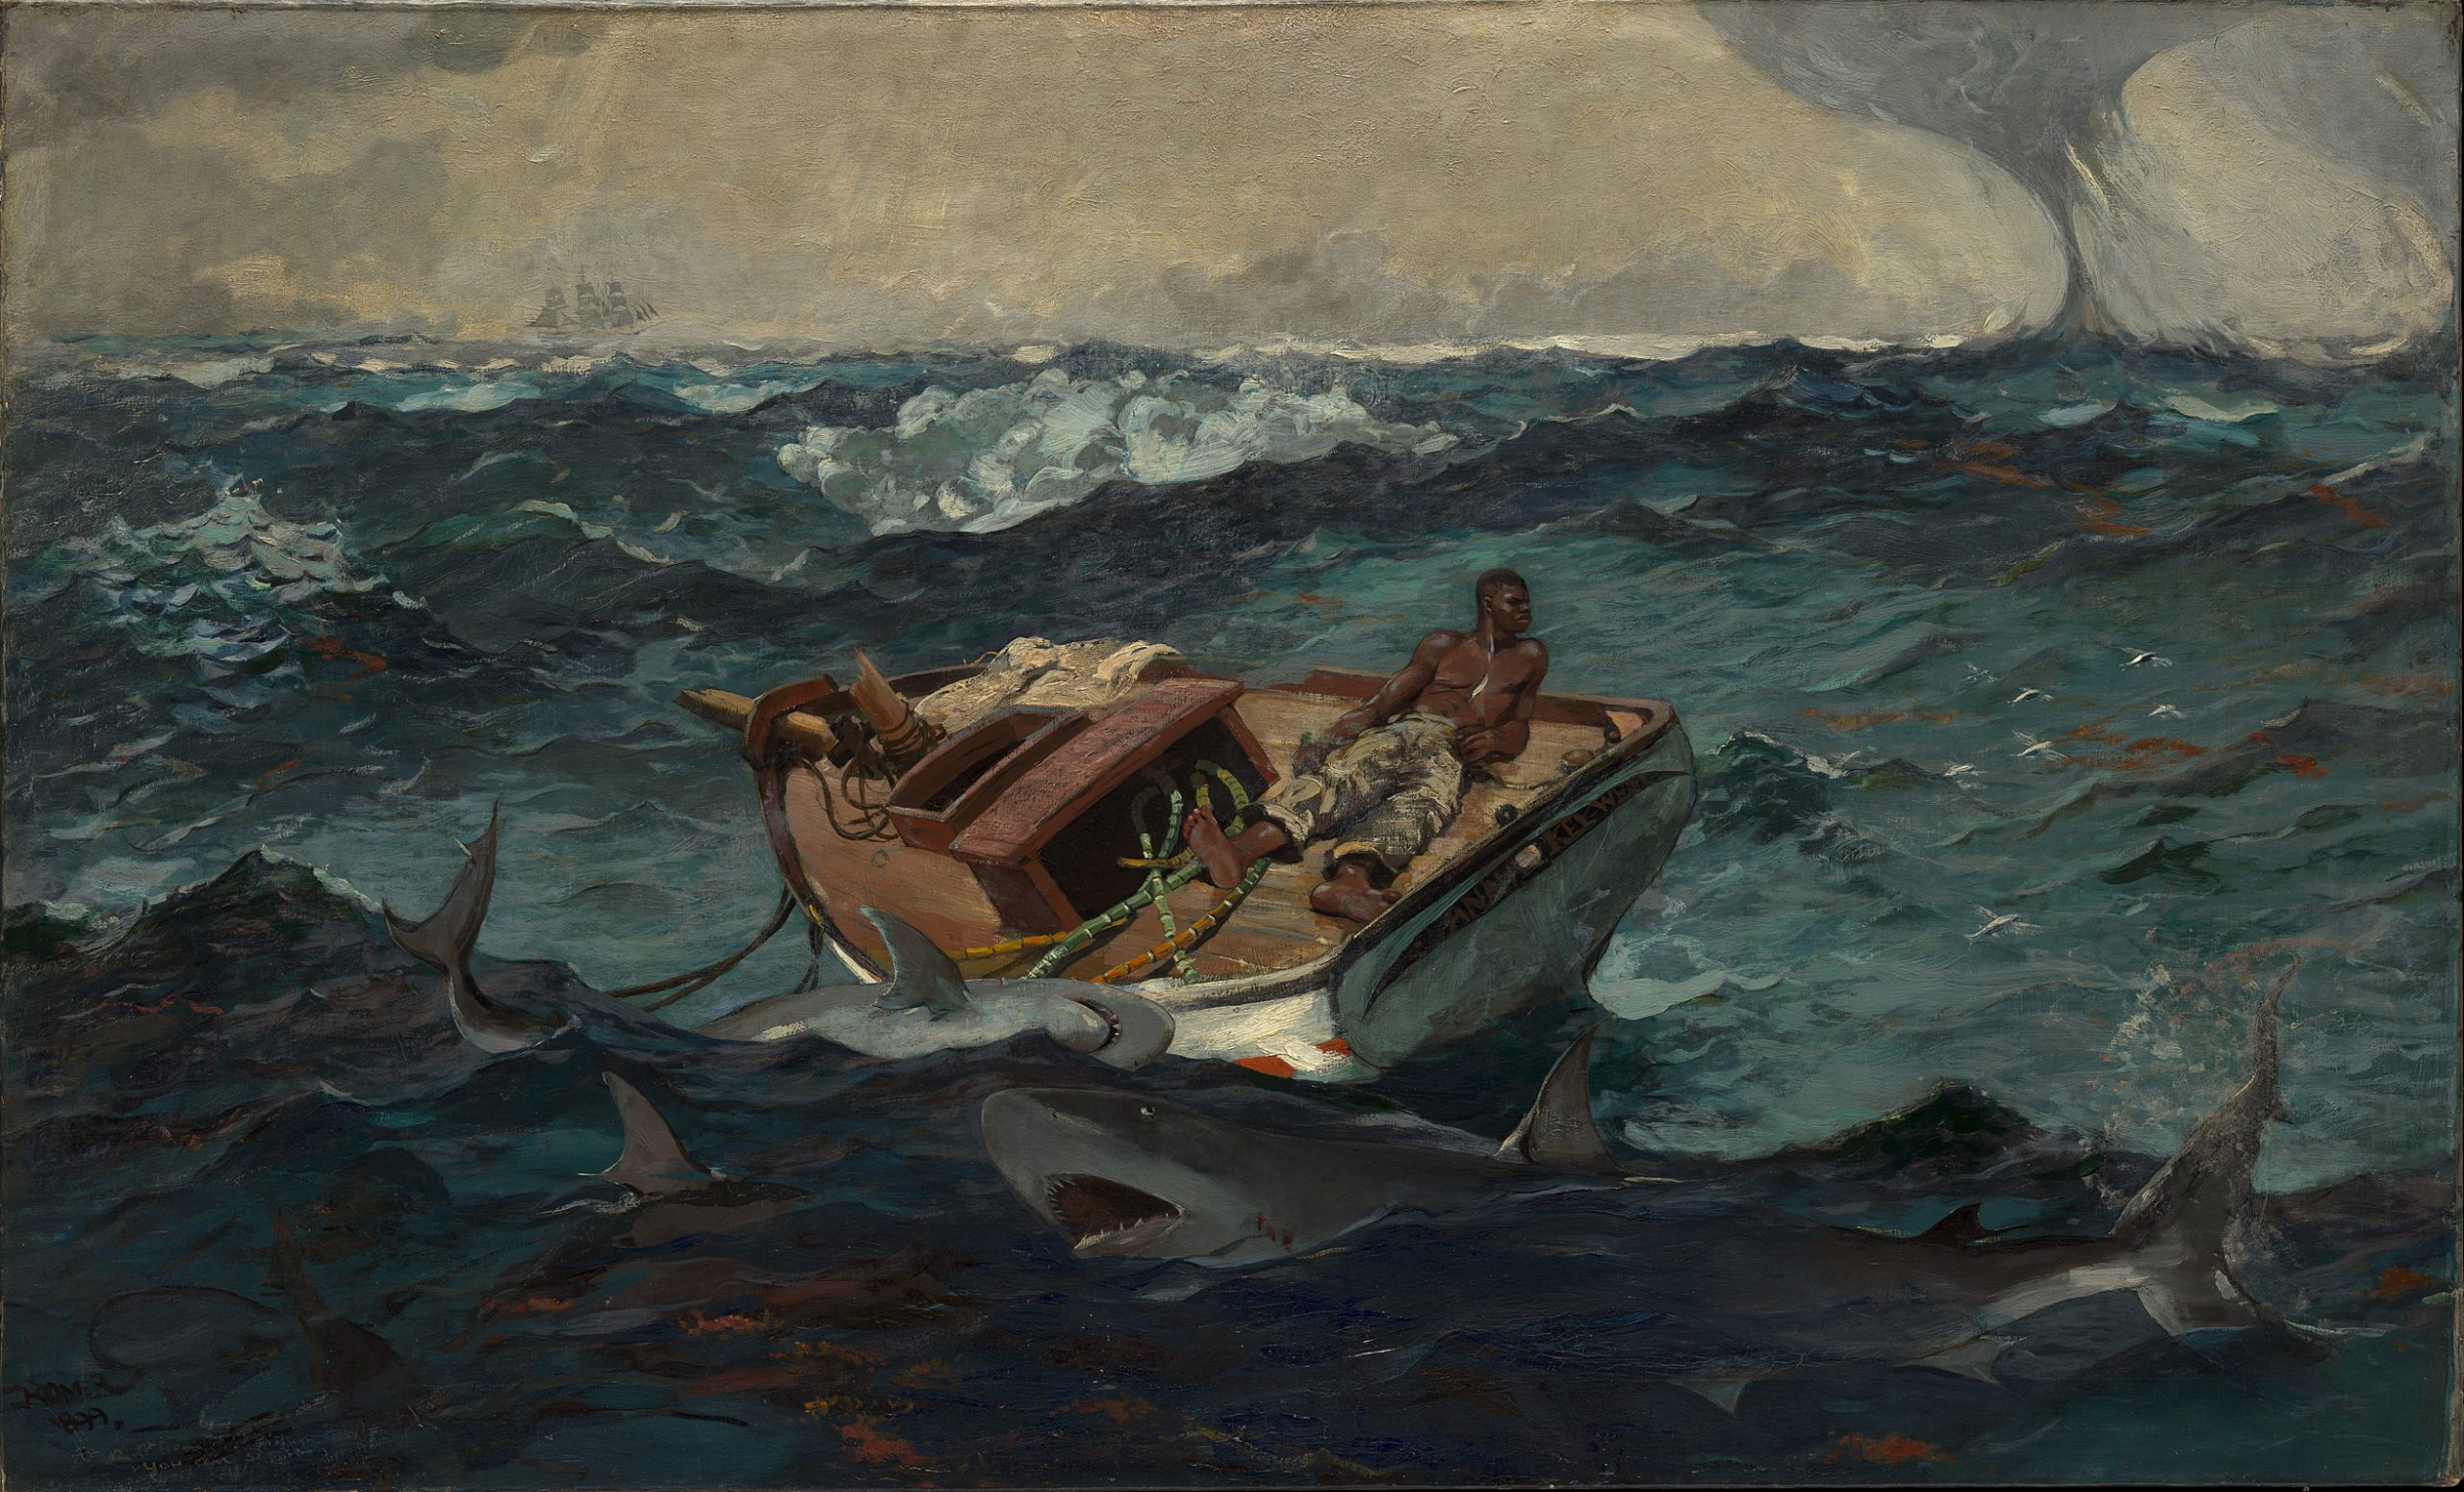 Winslow Homer The Gulf Stream, 1899 (reworked by 1906), Oil on canvas, 71.4 x 124.8 cm, The Metropolitan Museum of Art, New York
Catharine Lorillard Wolfe Collection, Wolfe Fund, 1906 06.1234
© The Metropolitan Museum of Art, New York